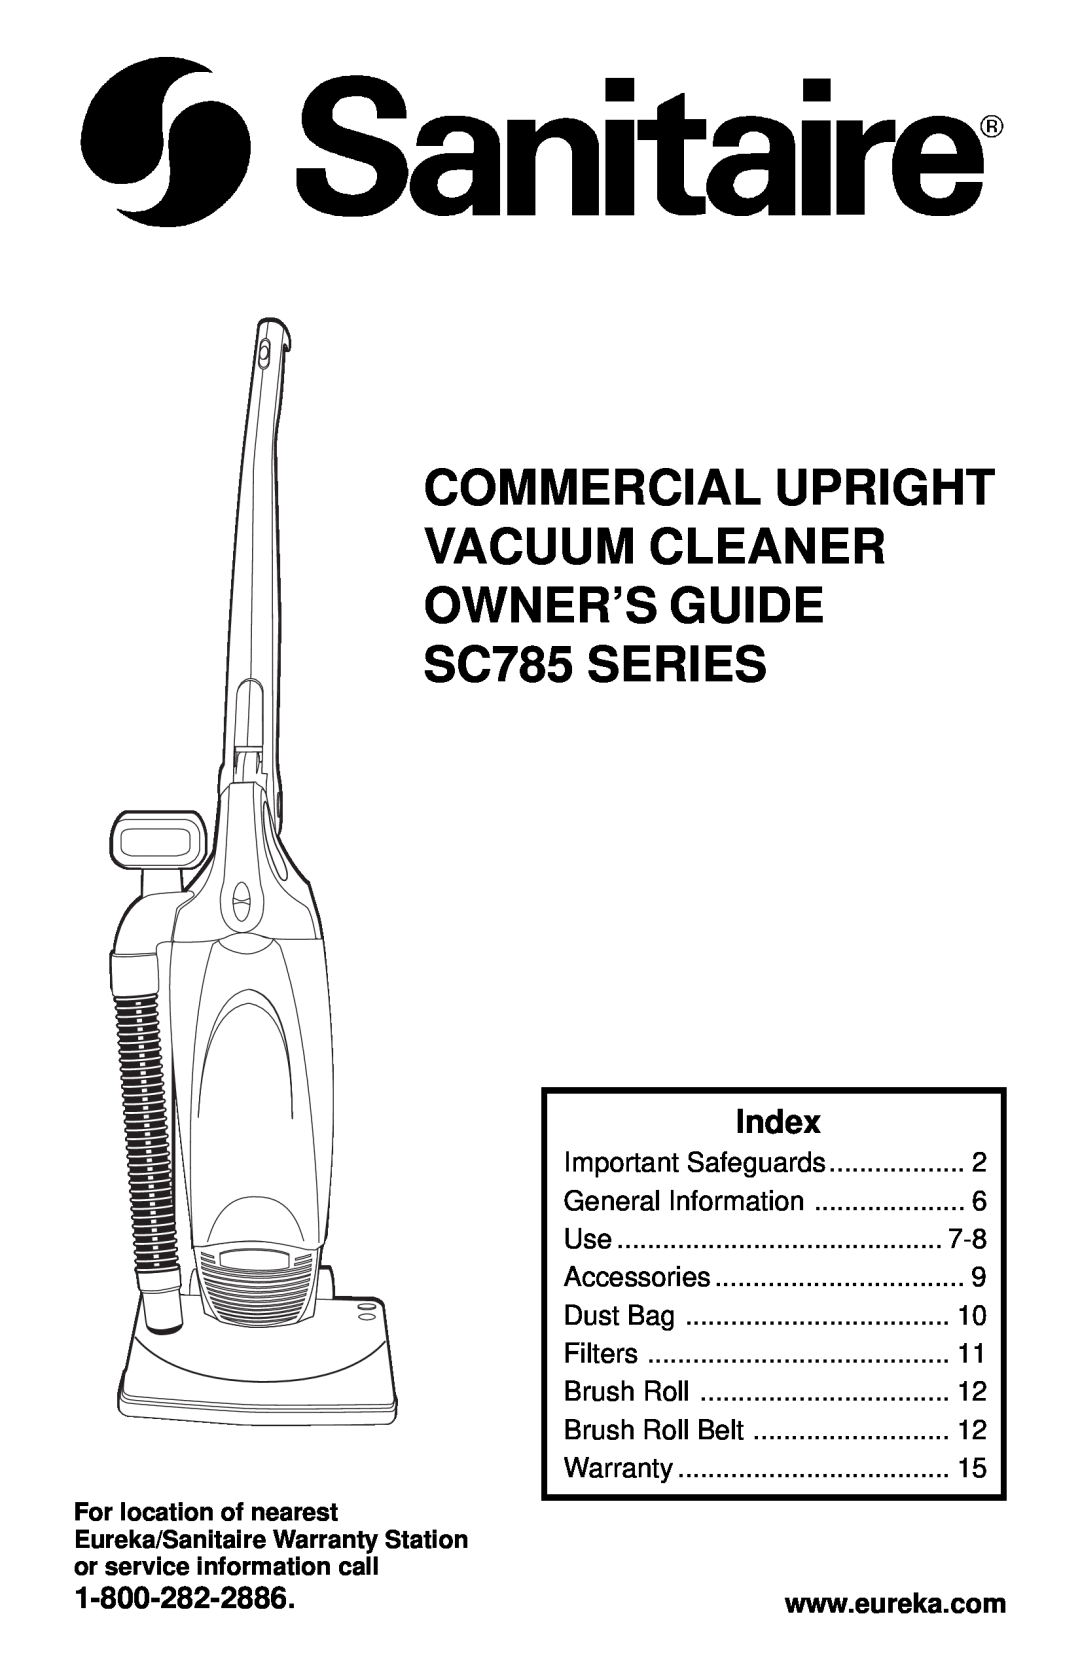 Sanitaire SC785 SERIES warranty Index, Commercial Upright Vacuum Cleaner Owner’S Guide, General Information, Accessories 